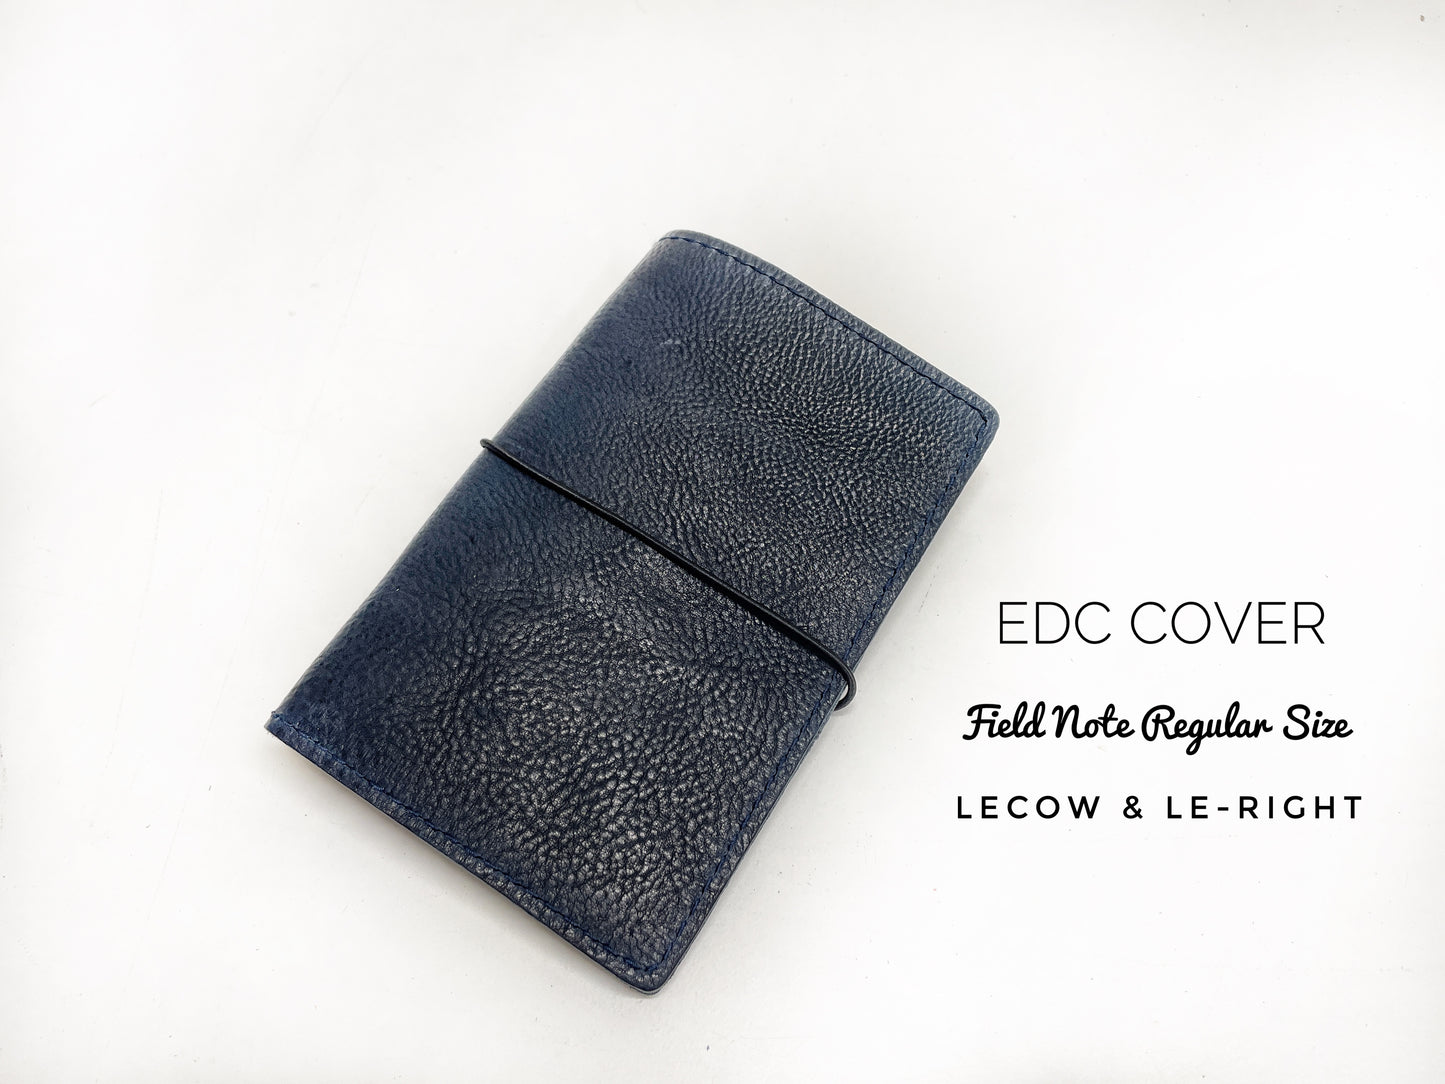 EDC COVER, FIELD NOTE REGULAR SIZE